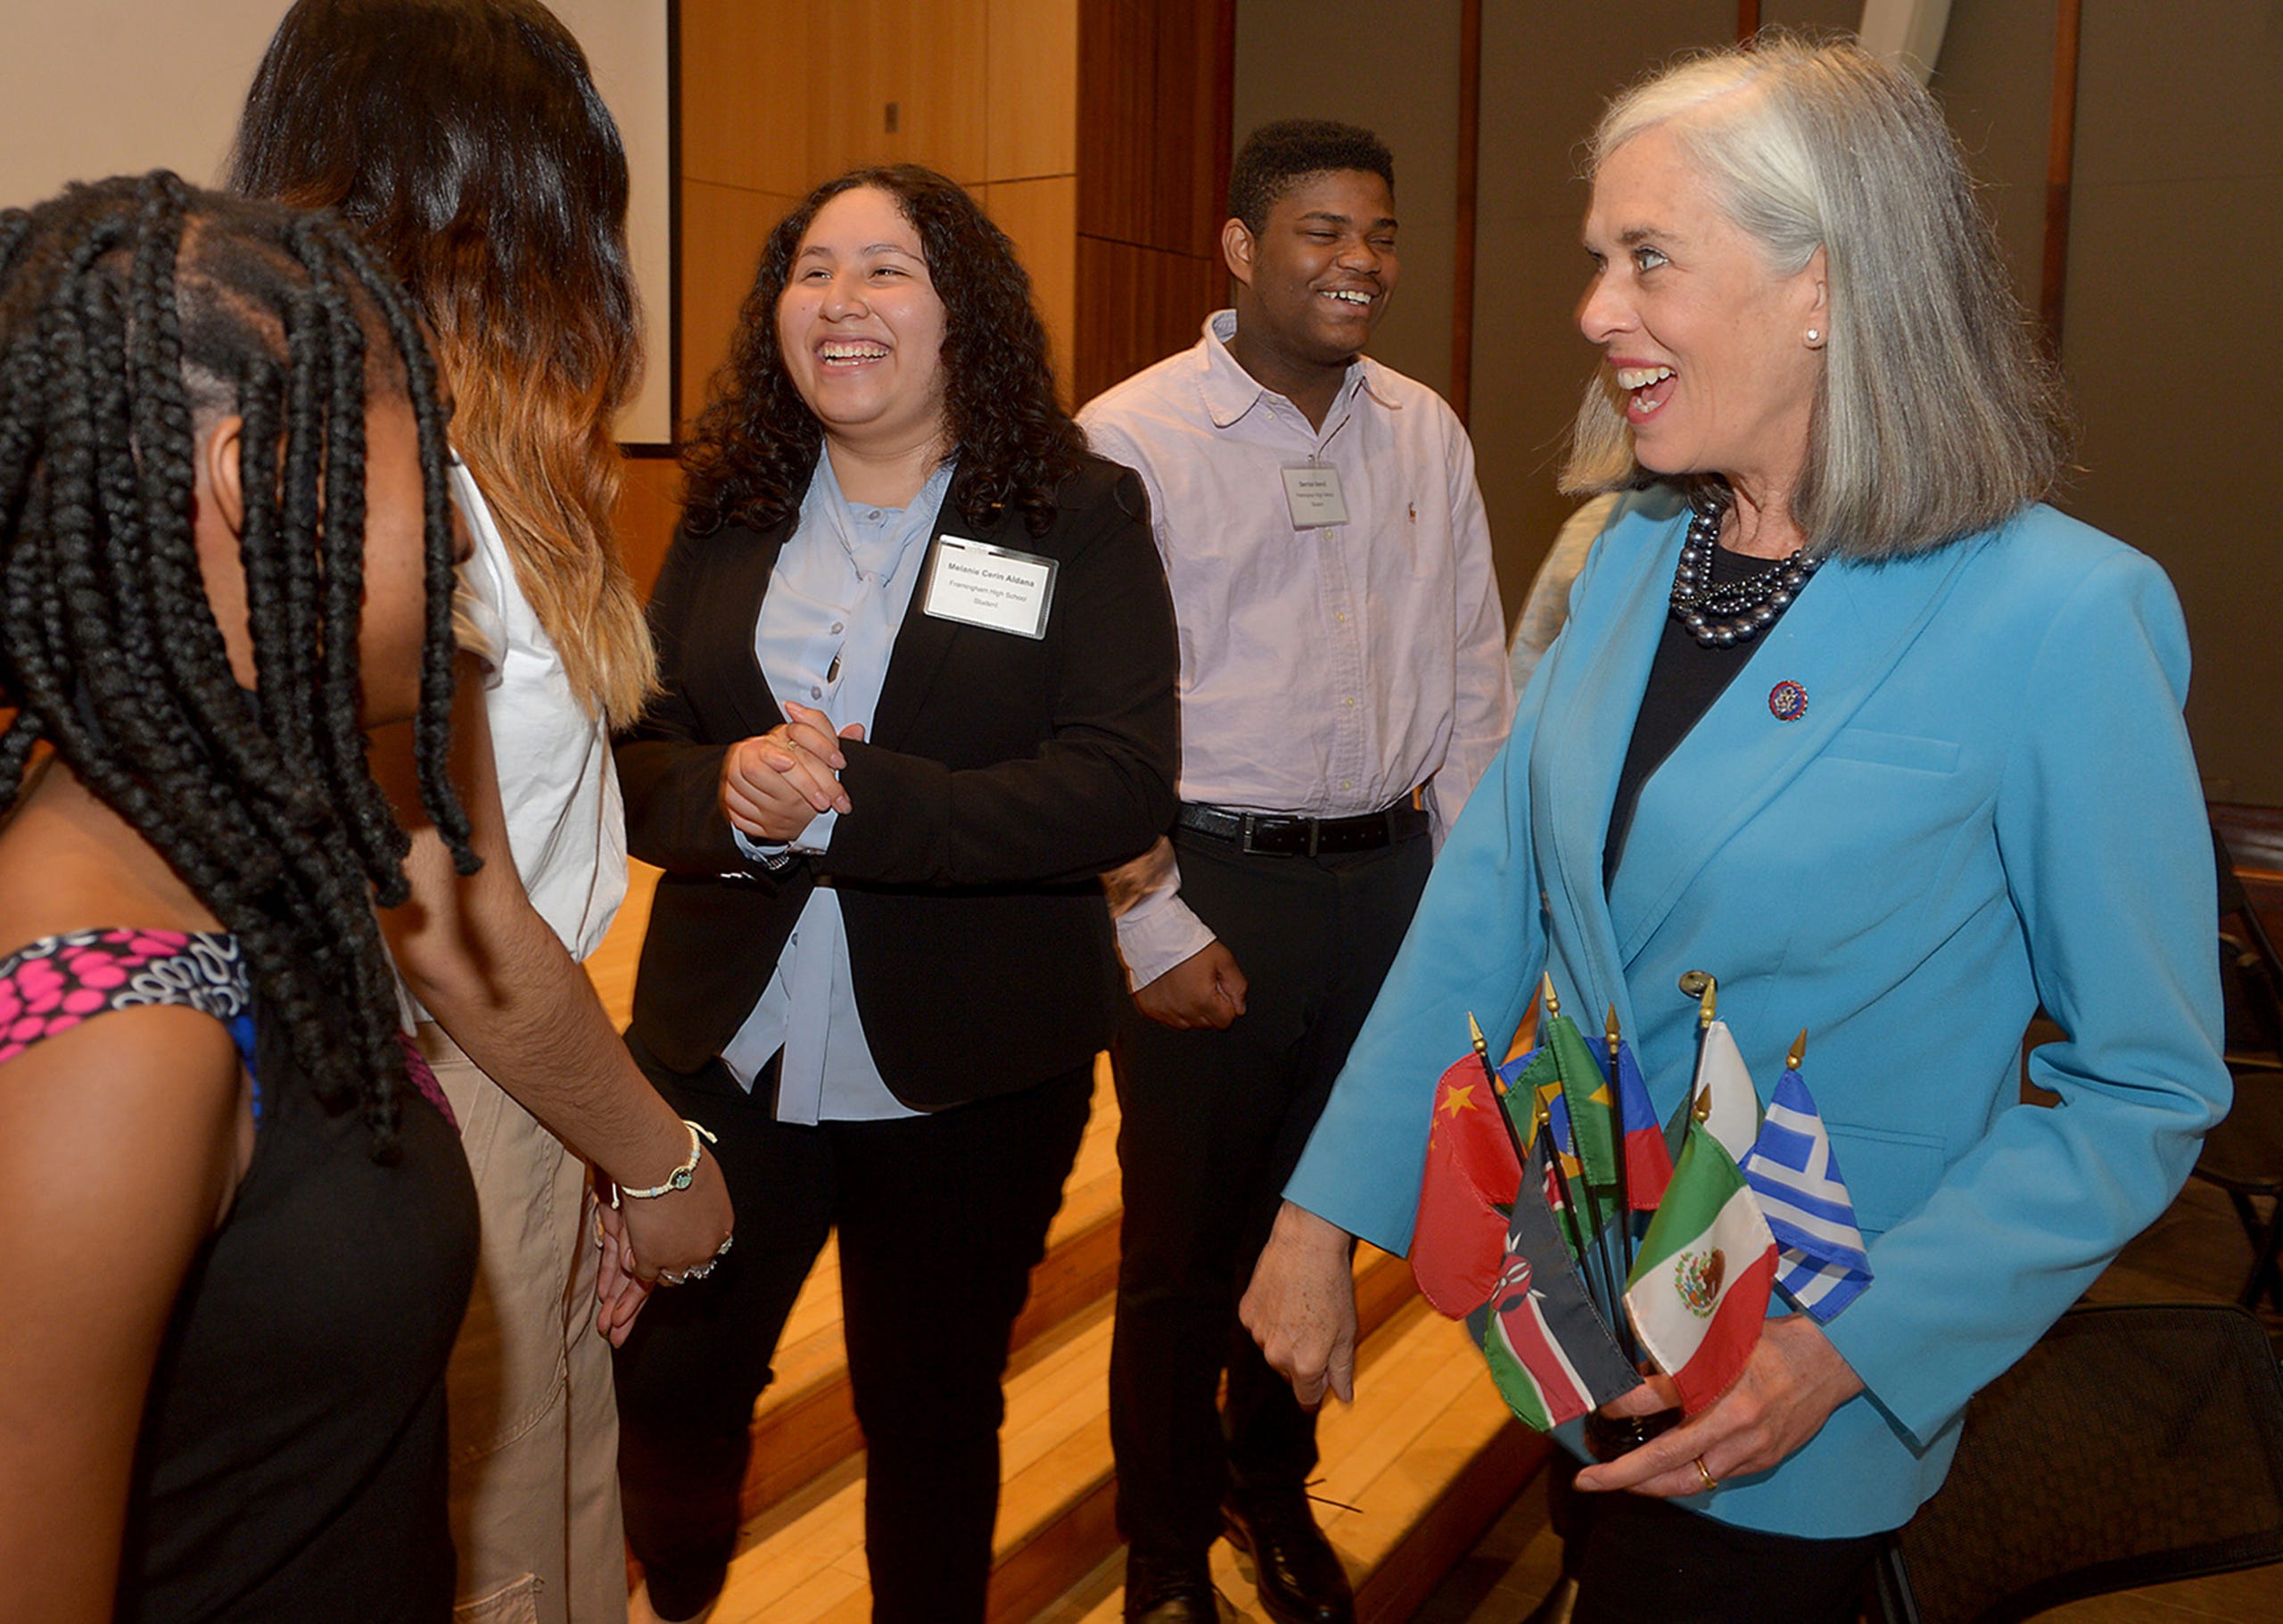 Rep. Katherine Clark, Assistant House Speaker, right,  smiles after a fist bump with Framingham High School student Melanie Cerin Aldana, center, after Clark announced a $600,000 expansion of the MetroWest Scholars Early Start program, early college funding for Waltham students,  at Framingham State University, May 3, 2022.  From left: Melody Obi-Ngo, Waltham; Dayana Alvarado Perez, Framingham; Aldana; Derrick Vervil, of Framingham, and Clark.